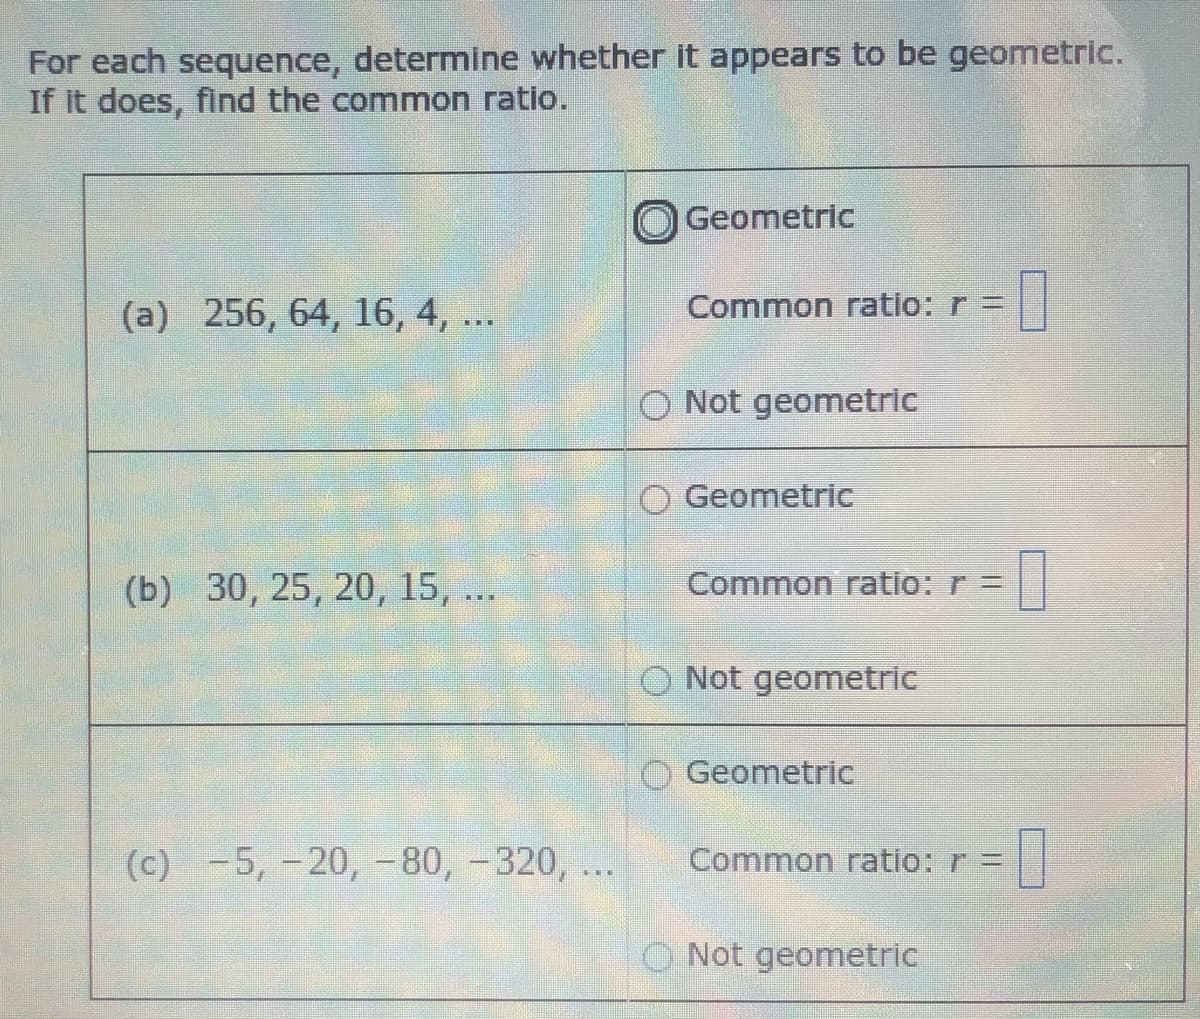 For each sequence, determine whether it appears to be geometric.
If it does, find the common ratio.
Geometric
(a) 256, 64, 16, 4, ..
Common ratio: r =
O Not geometric
O Geometric
(b) 30, 25, 20, 15, ...
Common ratio: r =
O Not geometric
O Geometric
(c) -5, -20, -80, -320, ...
Common ratio: r =
O Not geometric
